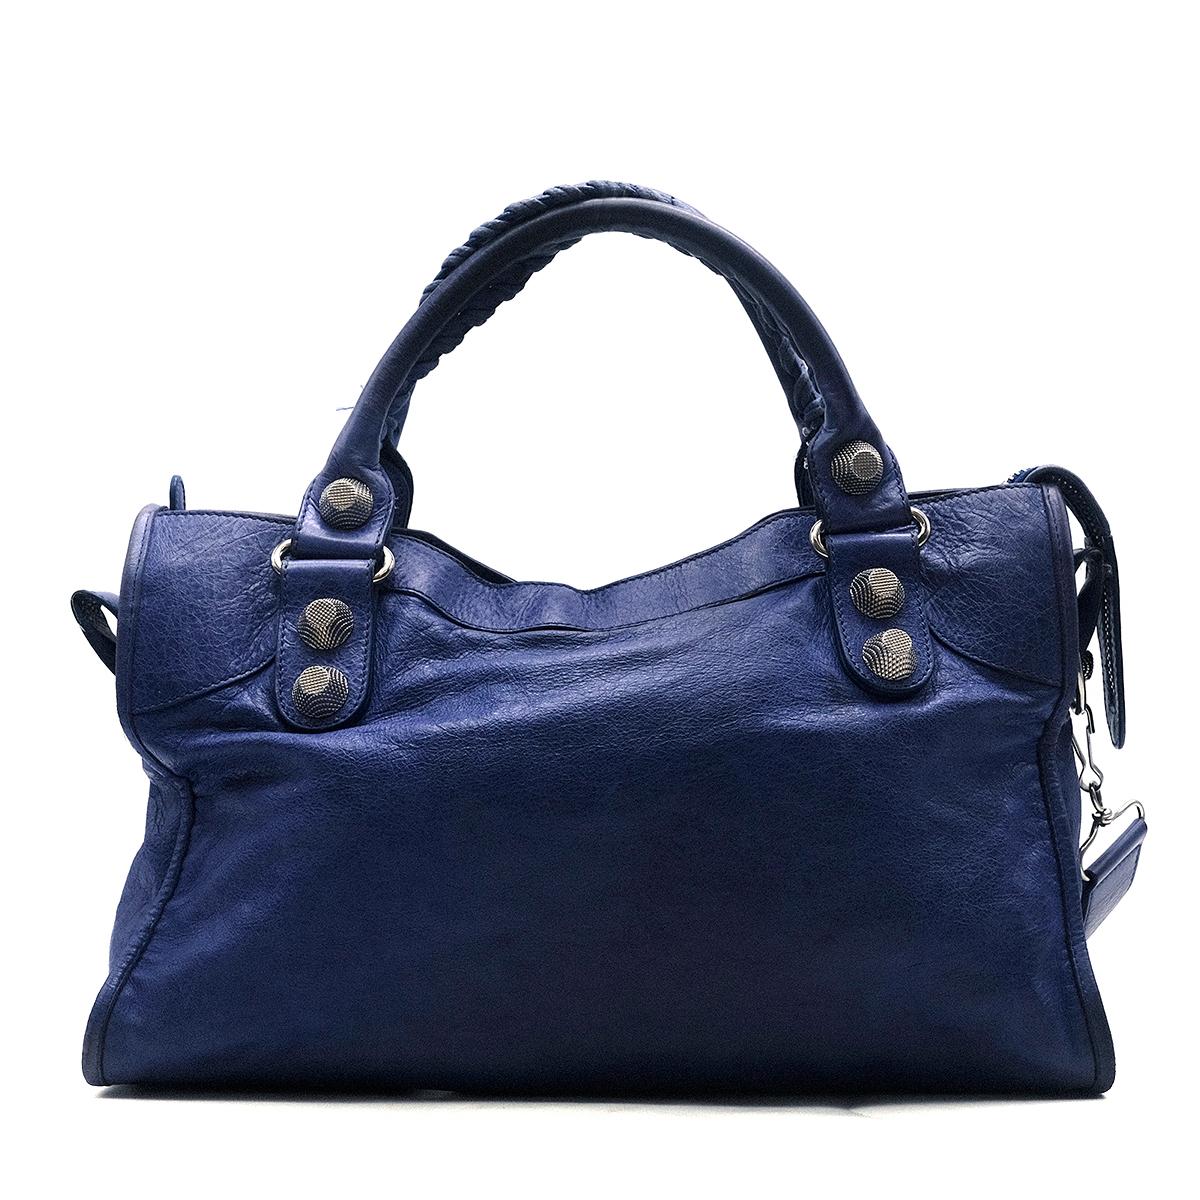 Balenciaga Classic Blue City Bag

- Blue, leather handbag
- Old brass silver-tone hardware
- Removable shoulder strap
- Hand-braided handles 
- Top zip fastening
- Large internal compartment with a zip pocket
- Front zip pocket
- This item comes